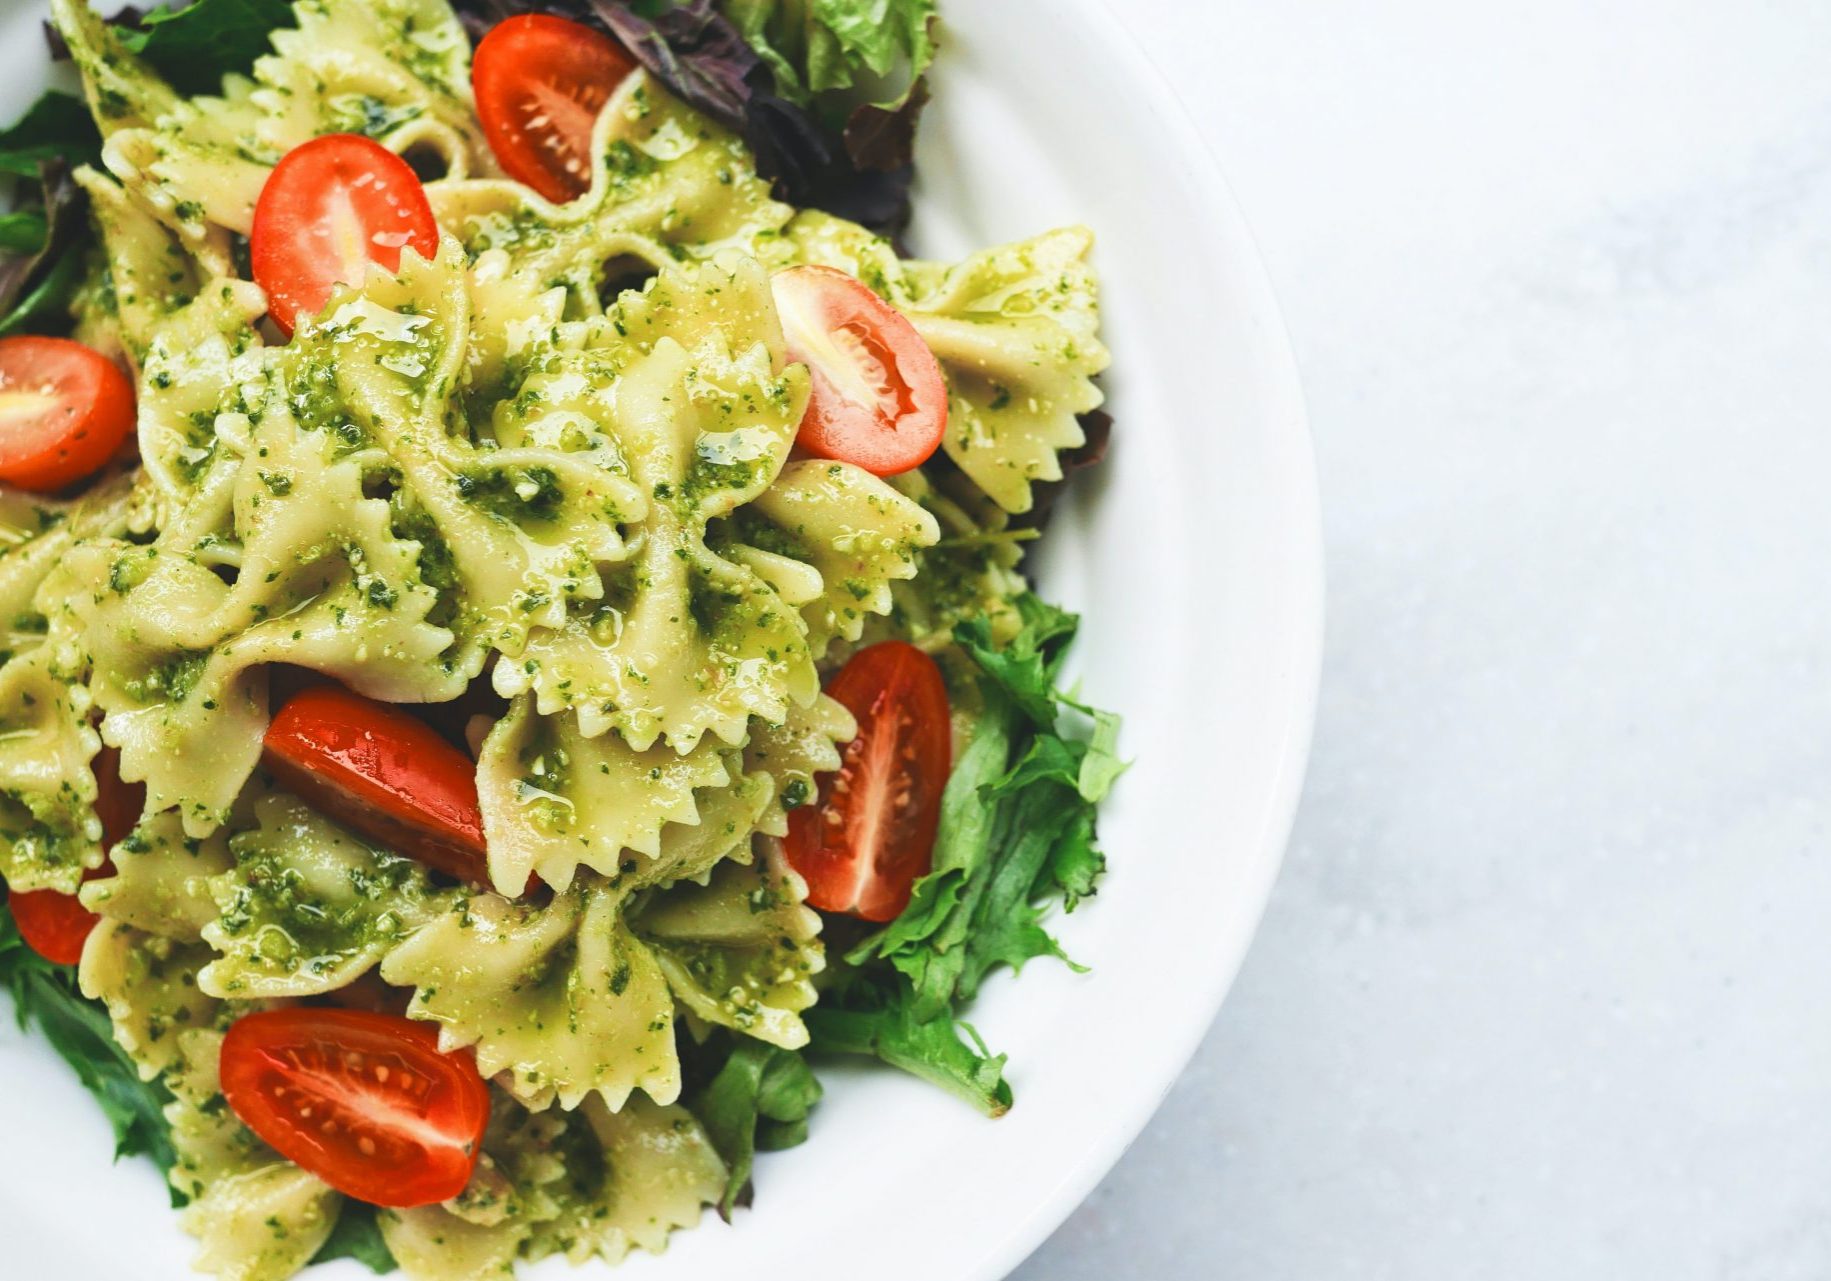 Farfalle with pesto, green salad and tomatoes in a white bowl on a light background